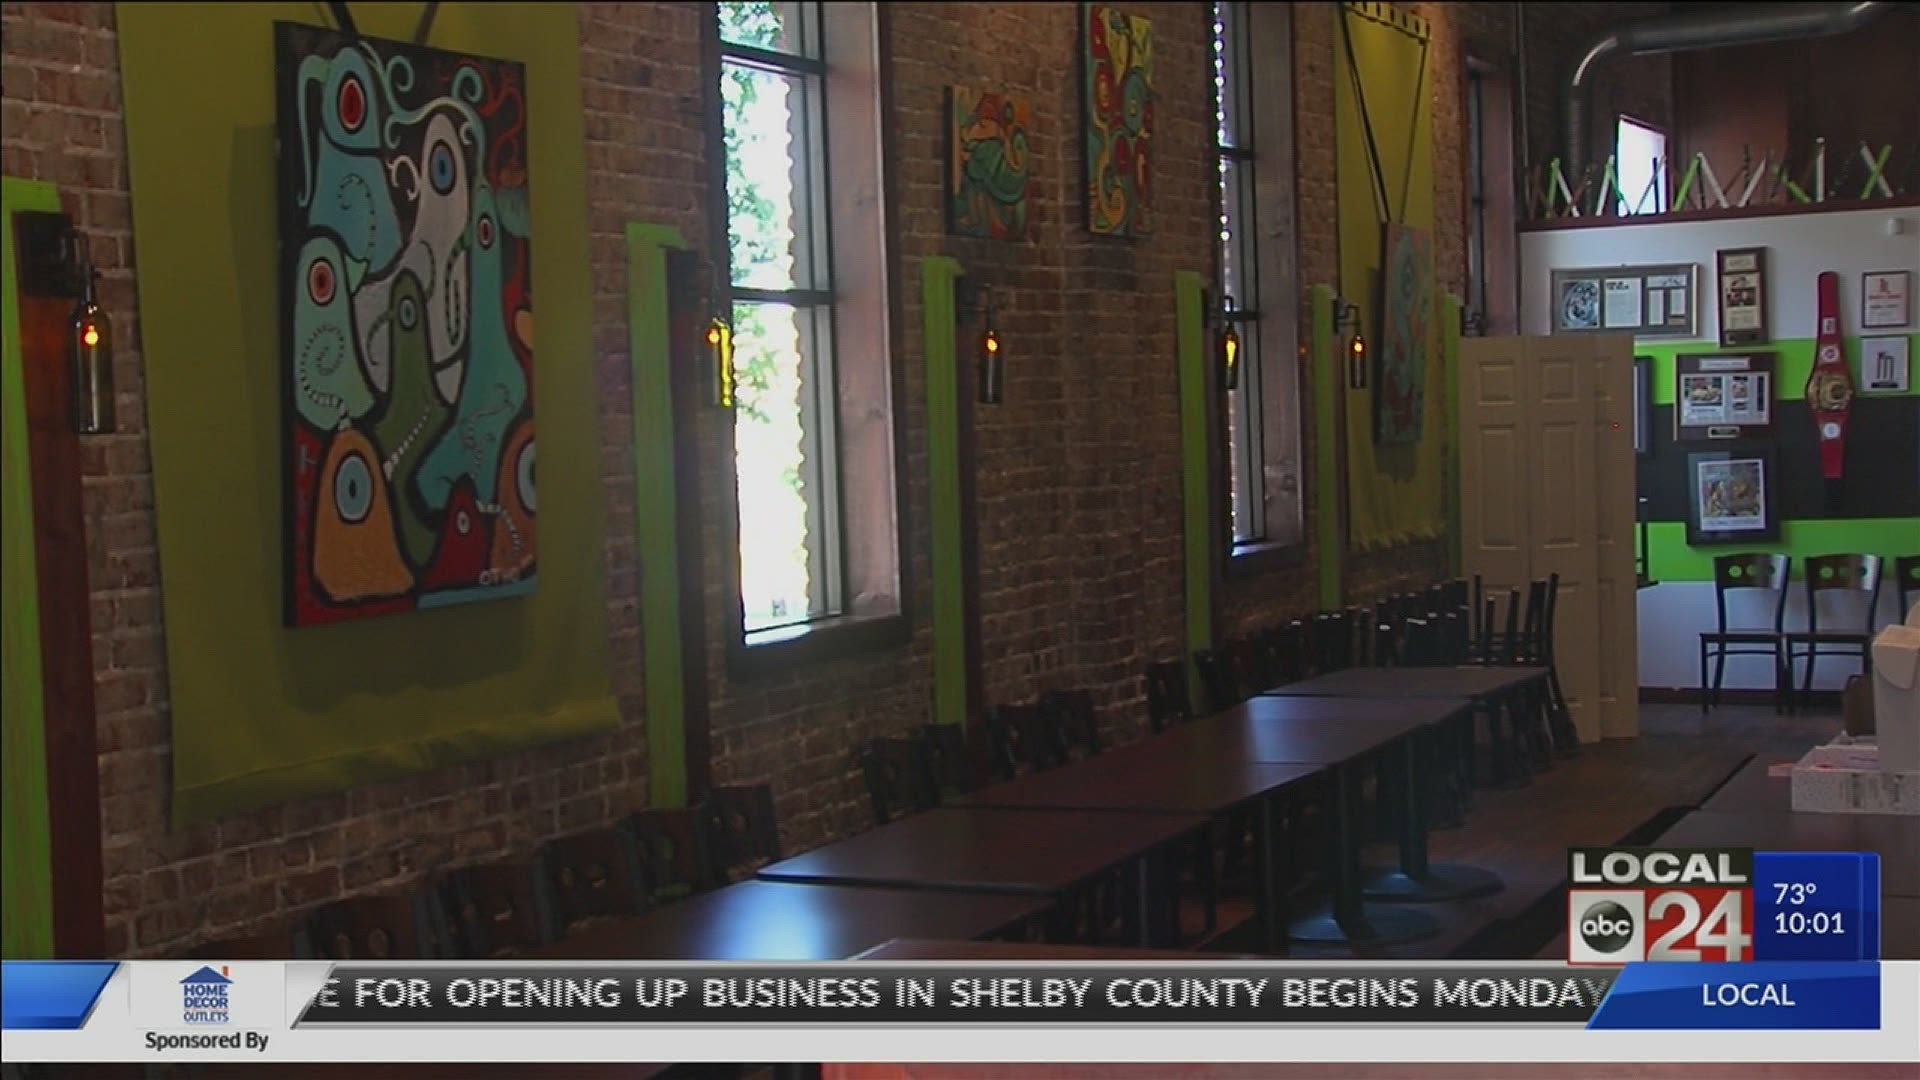 restaurant owners feel it is too early to open up businesses.